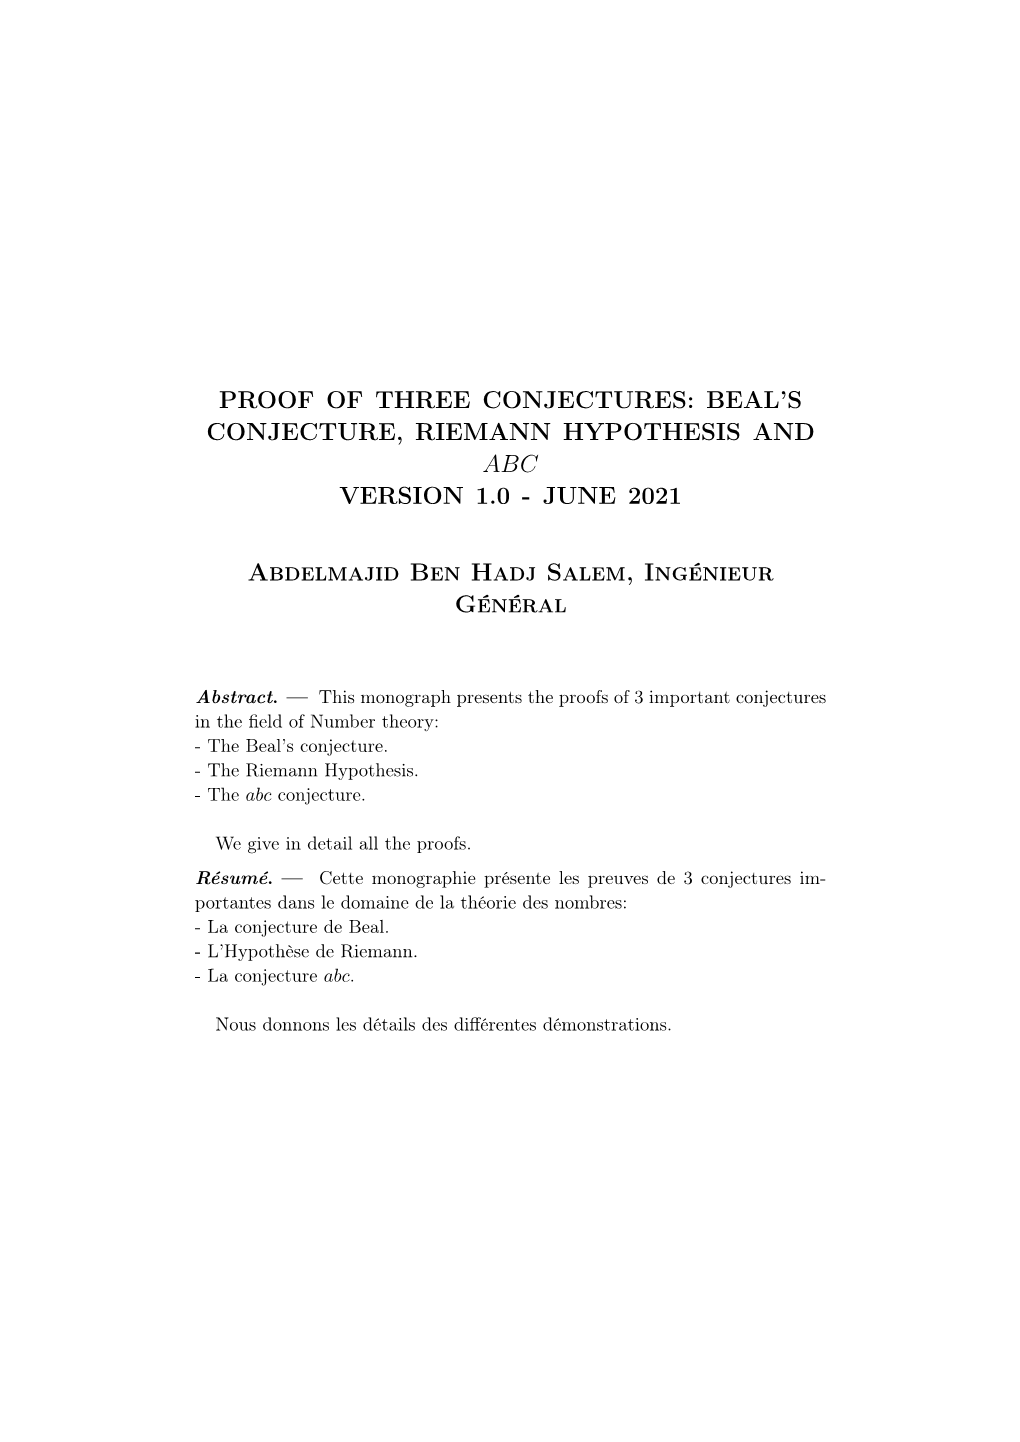 Proof of Three Conjectures: Beal's Conjecture, Riemann